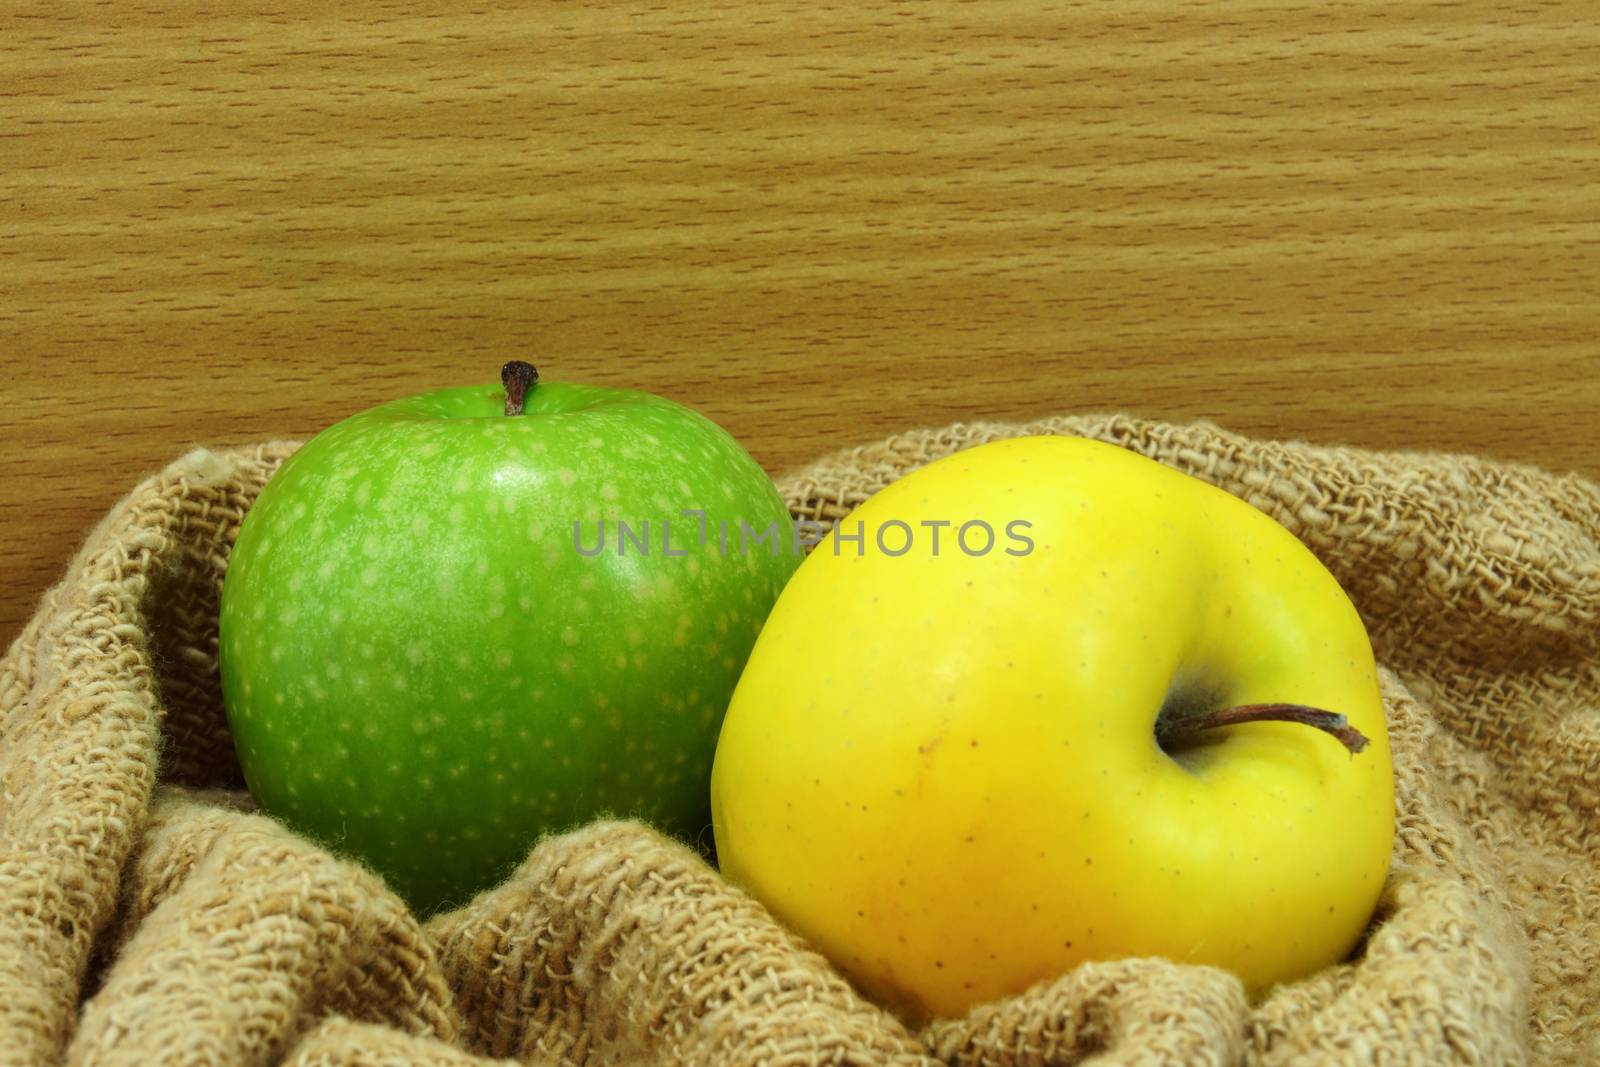 Yellow and green apple on fabric. by Noppharat_th